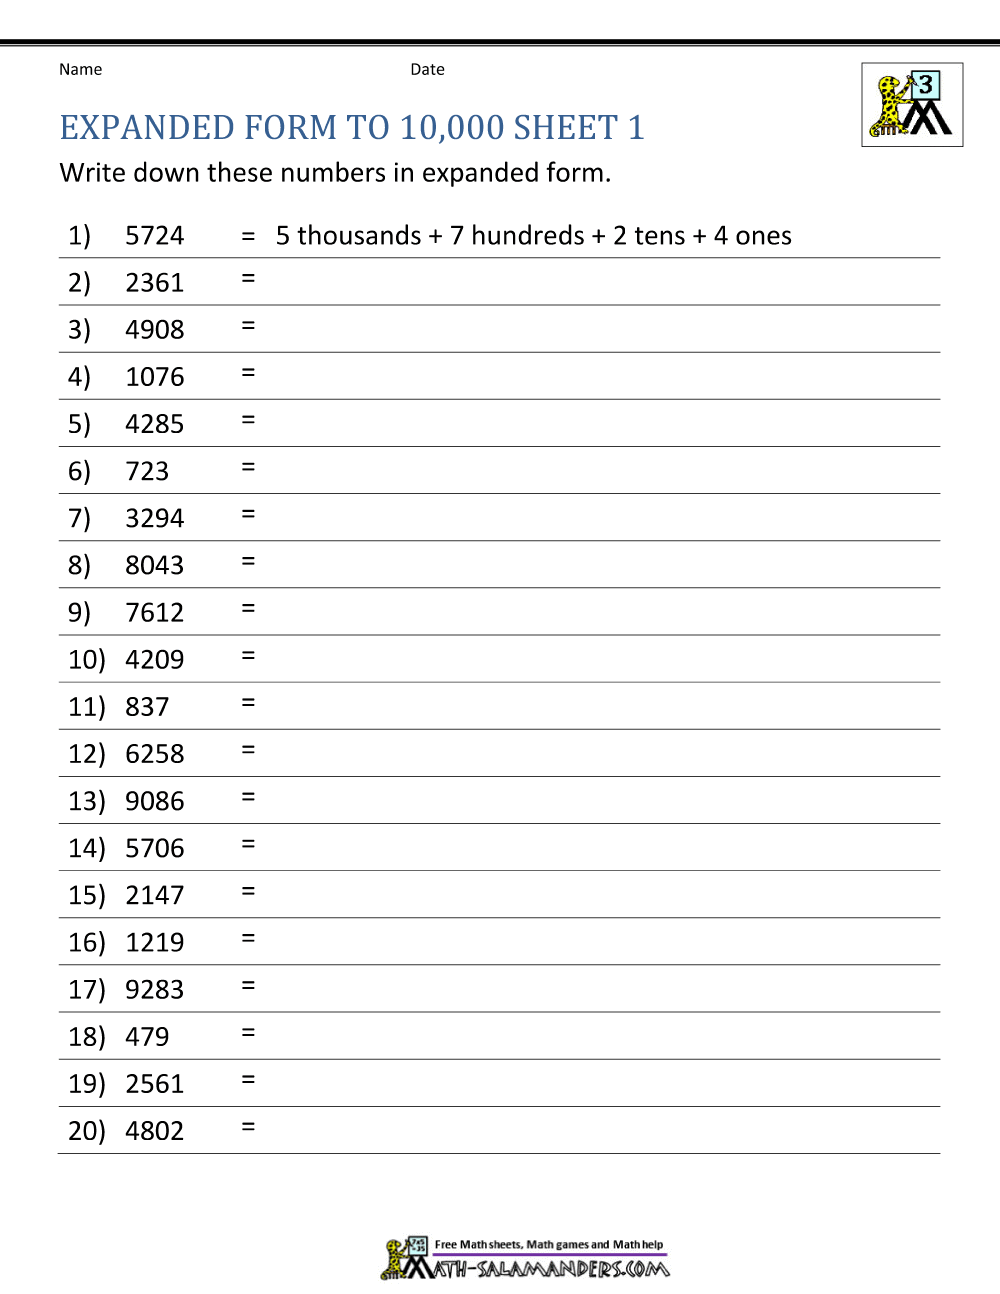 place-value-4-digit-numbers